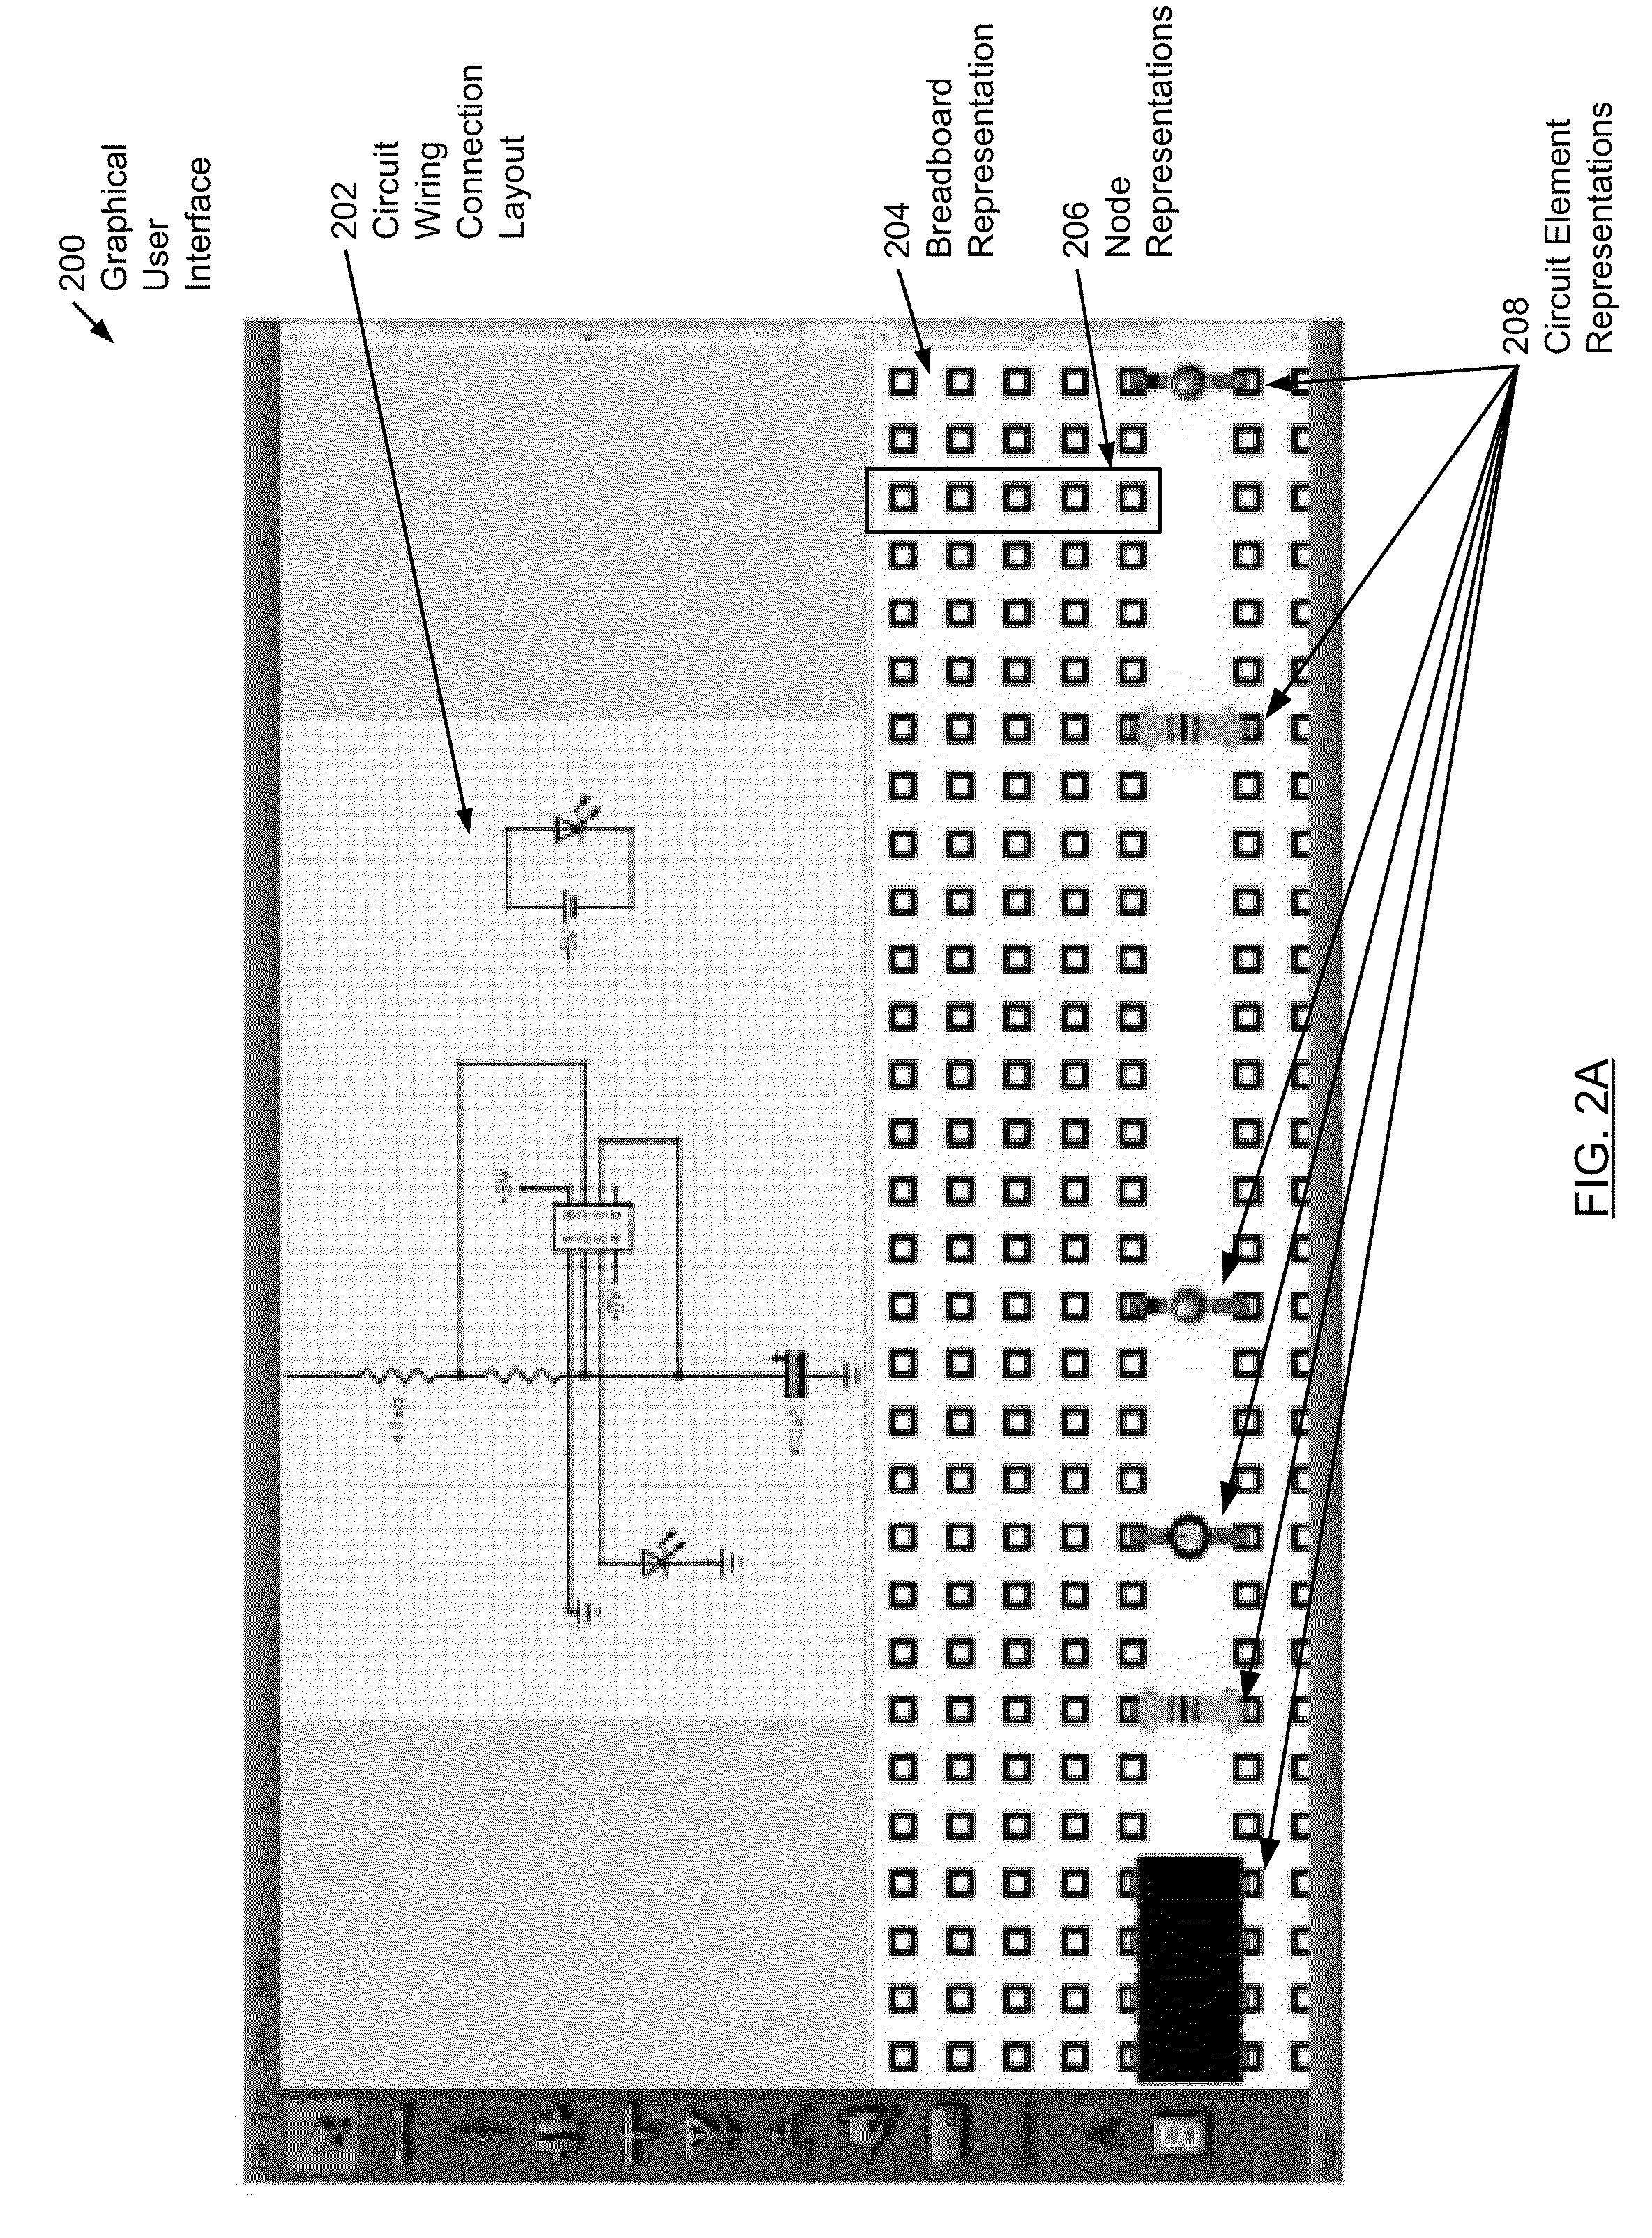 Method and system for using a breadboard